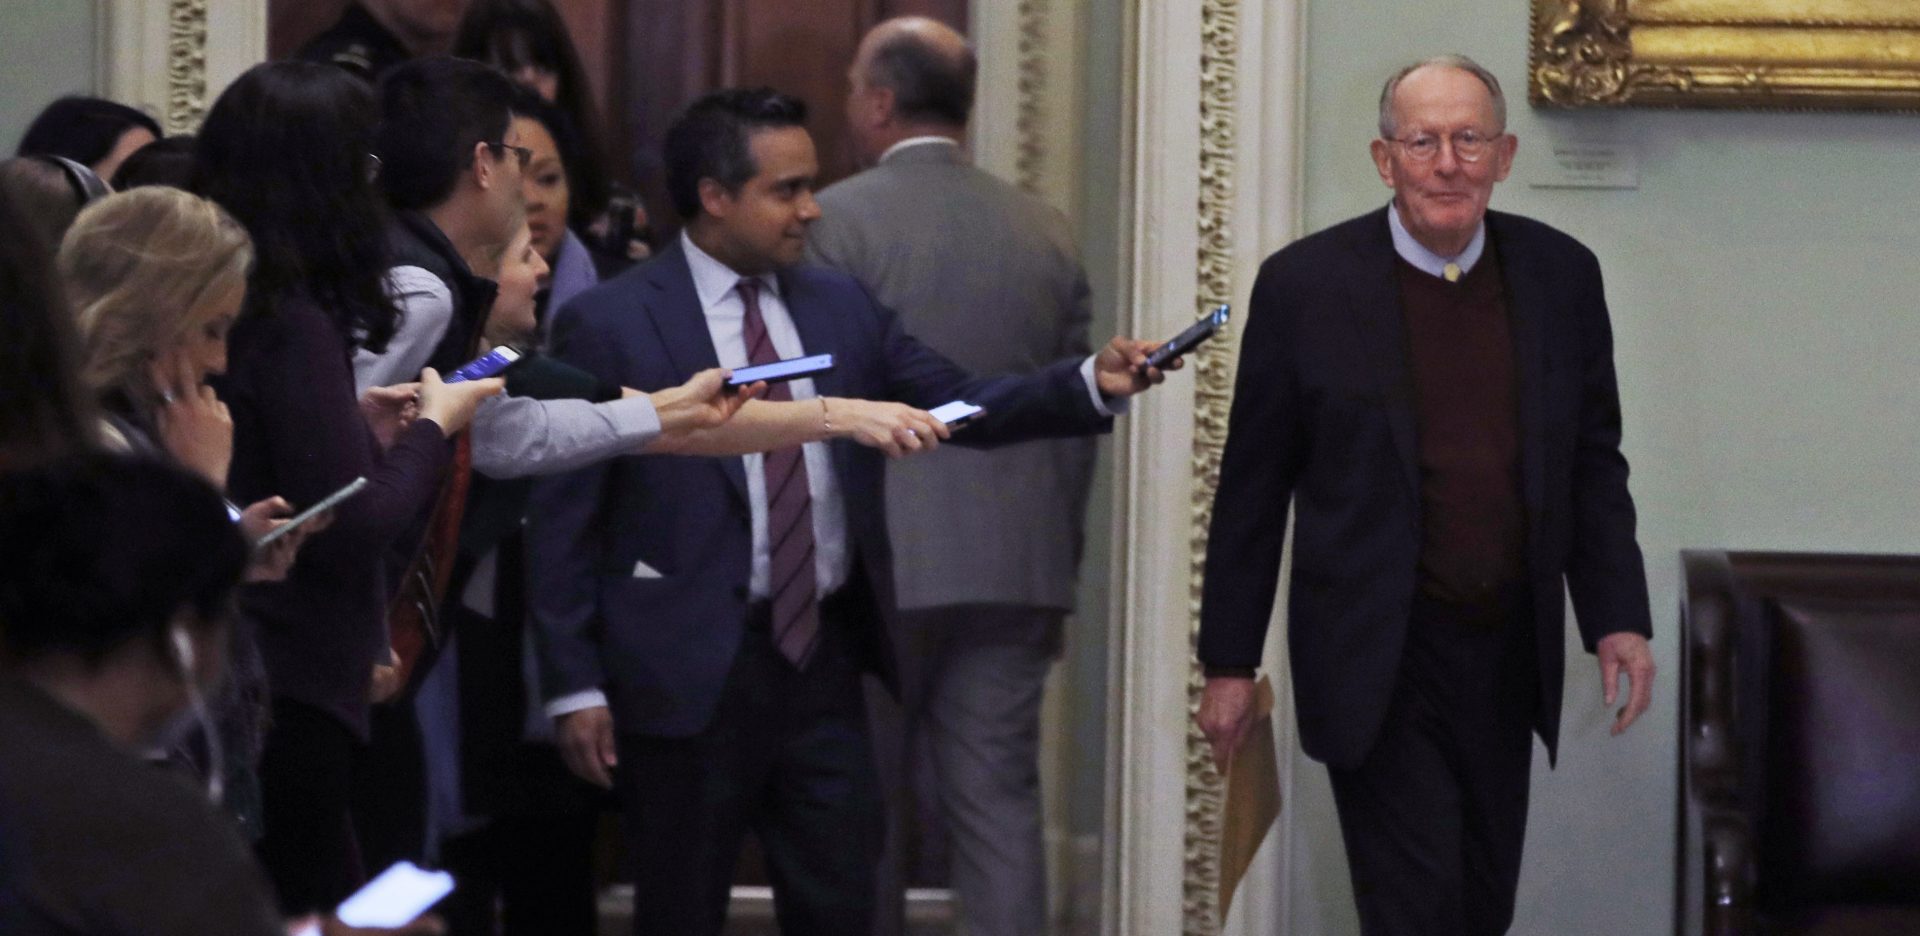 Sen. Lamar Alexander, R-Tenn., walks out of the Senate chambers during a break in the impeachment trial of President Donald Trump at the U.S. Capitol Thursday Jan 30, 2020, in Washington.